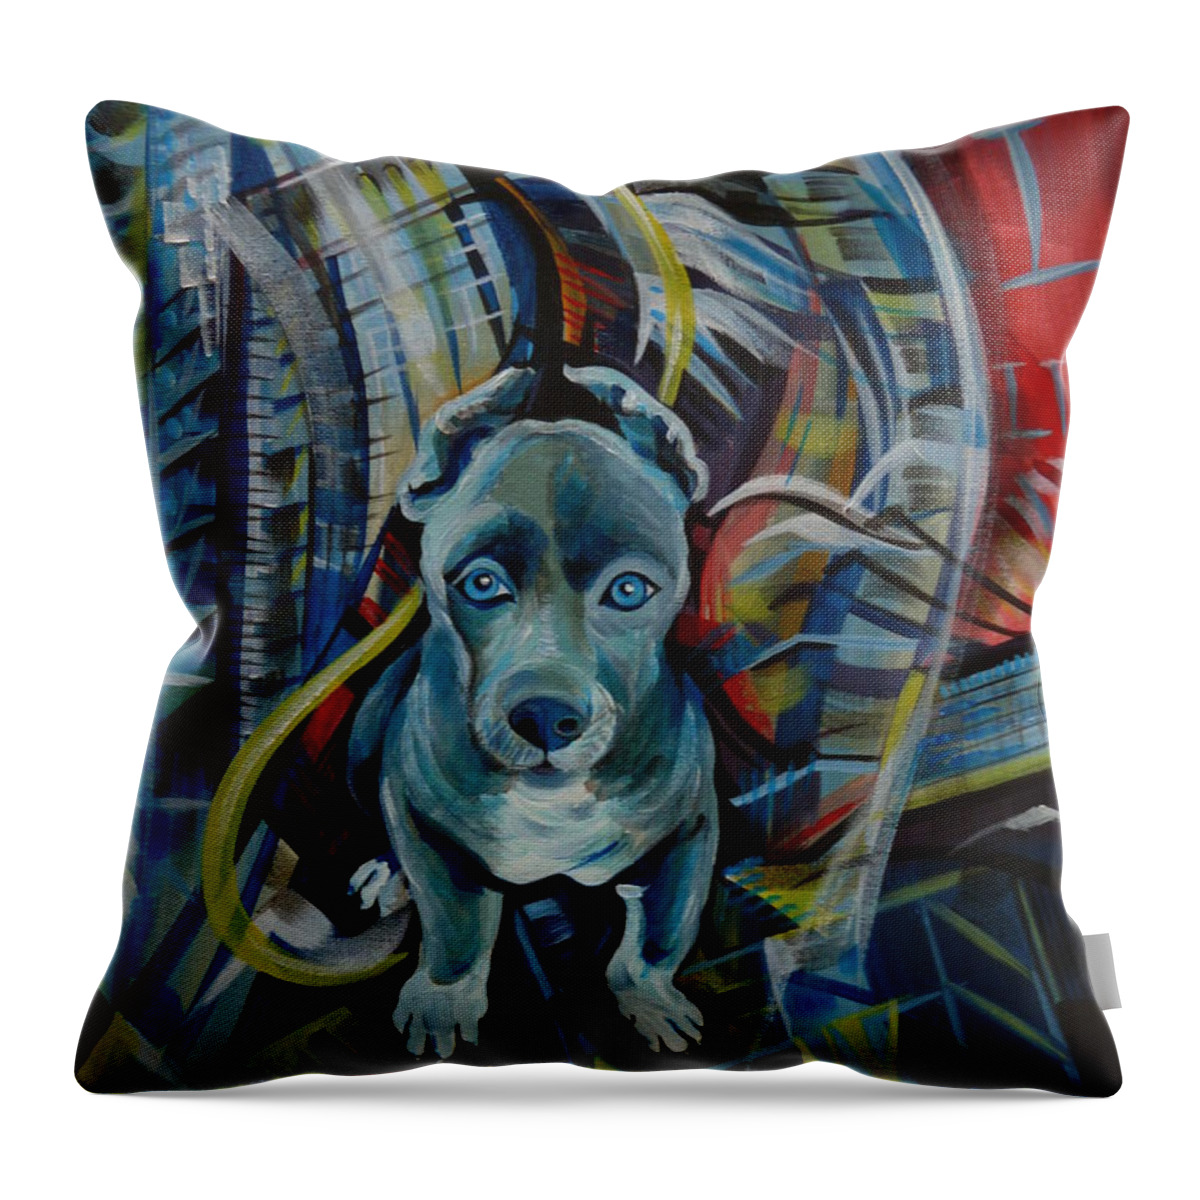 New York Throw Pillow featuring the painting New York by Anna Duyunova